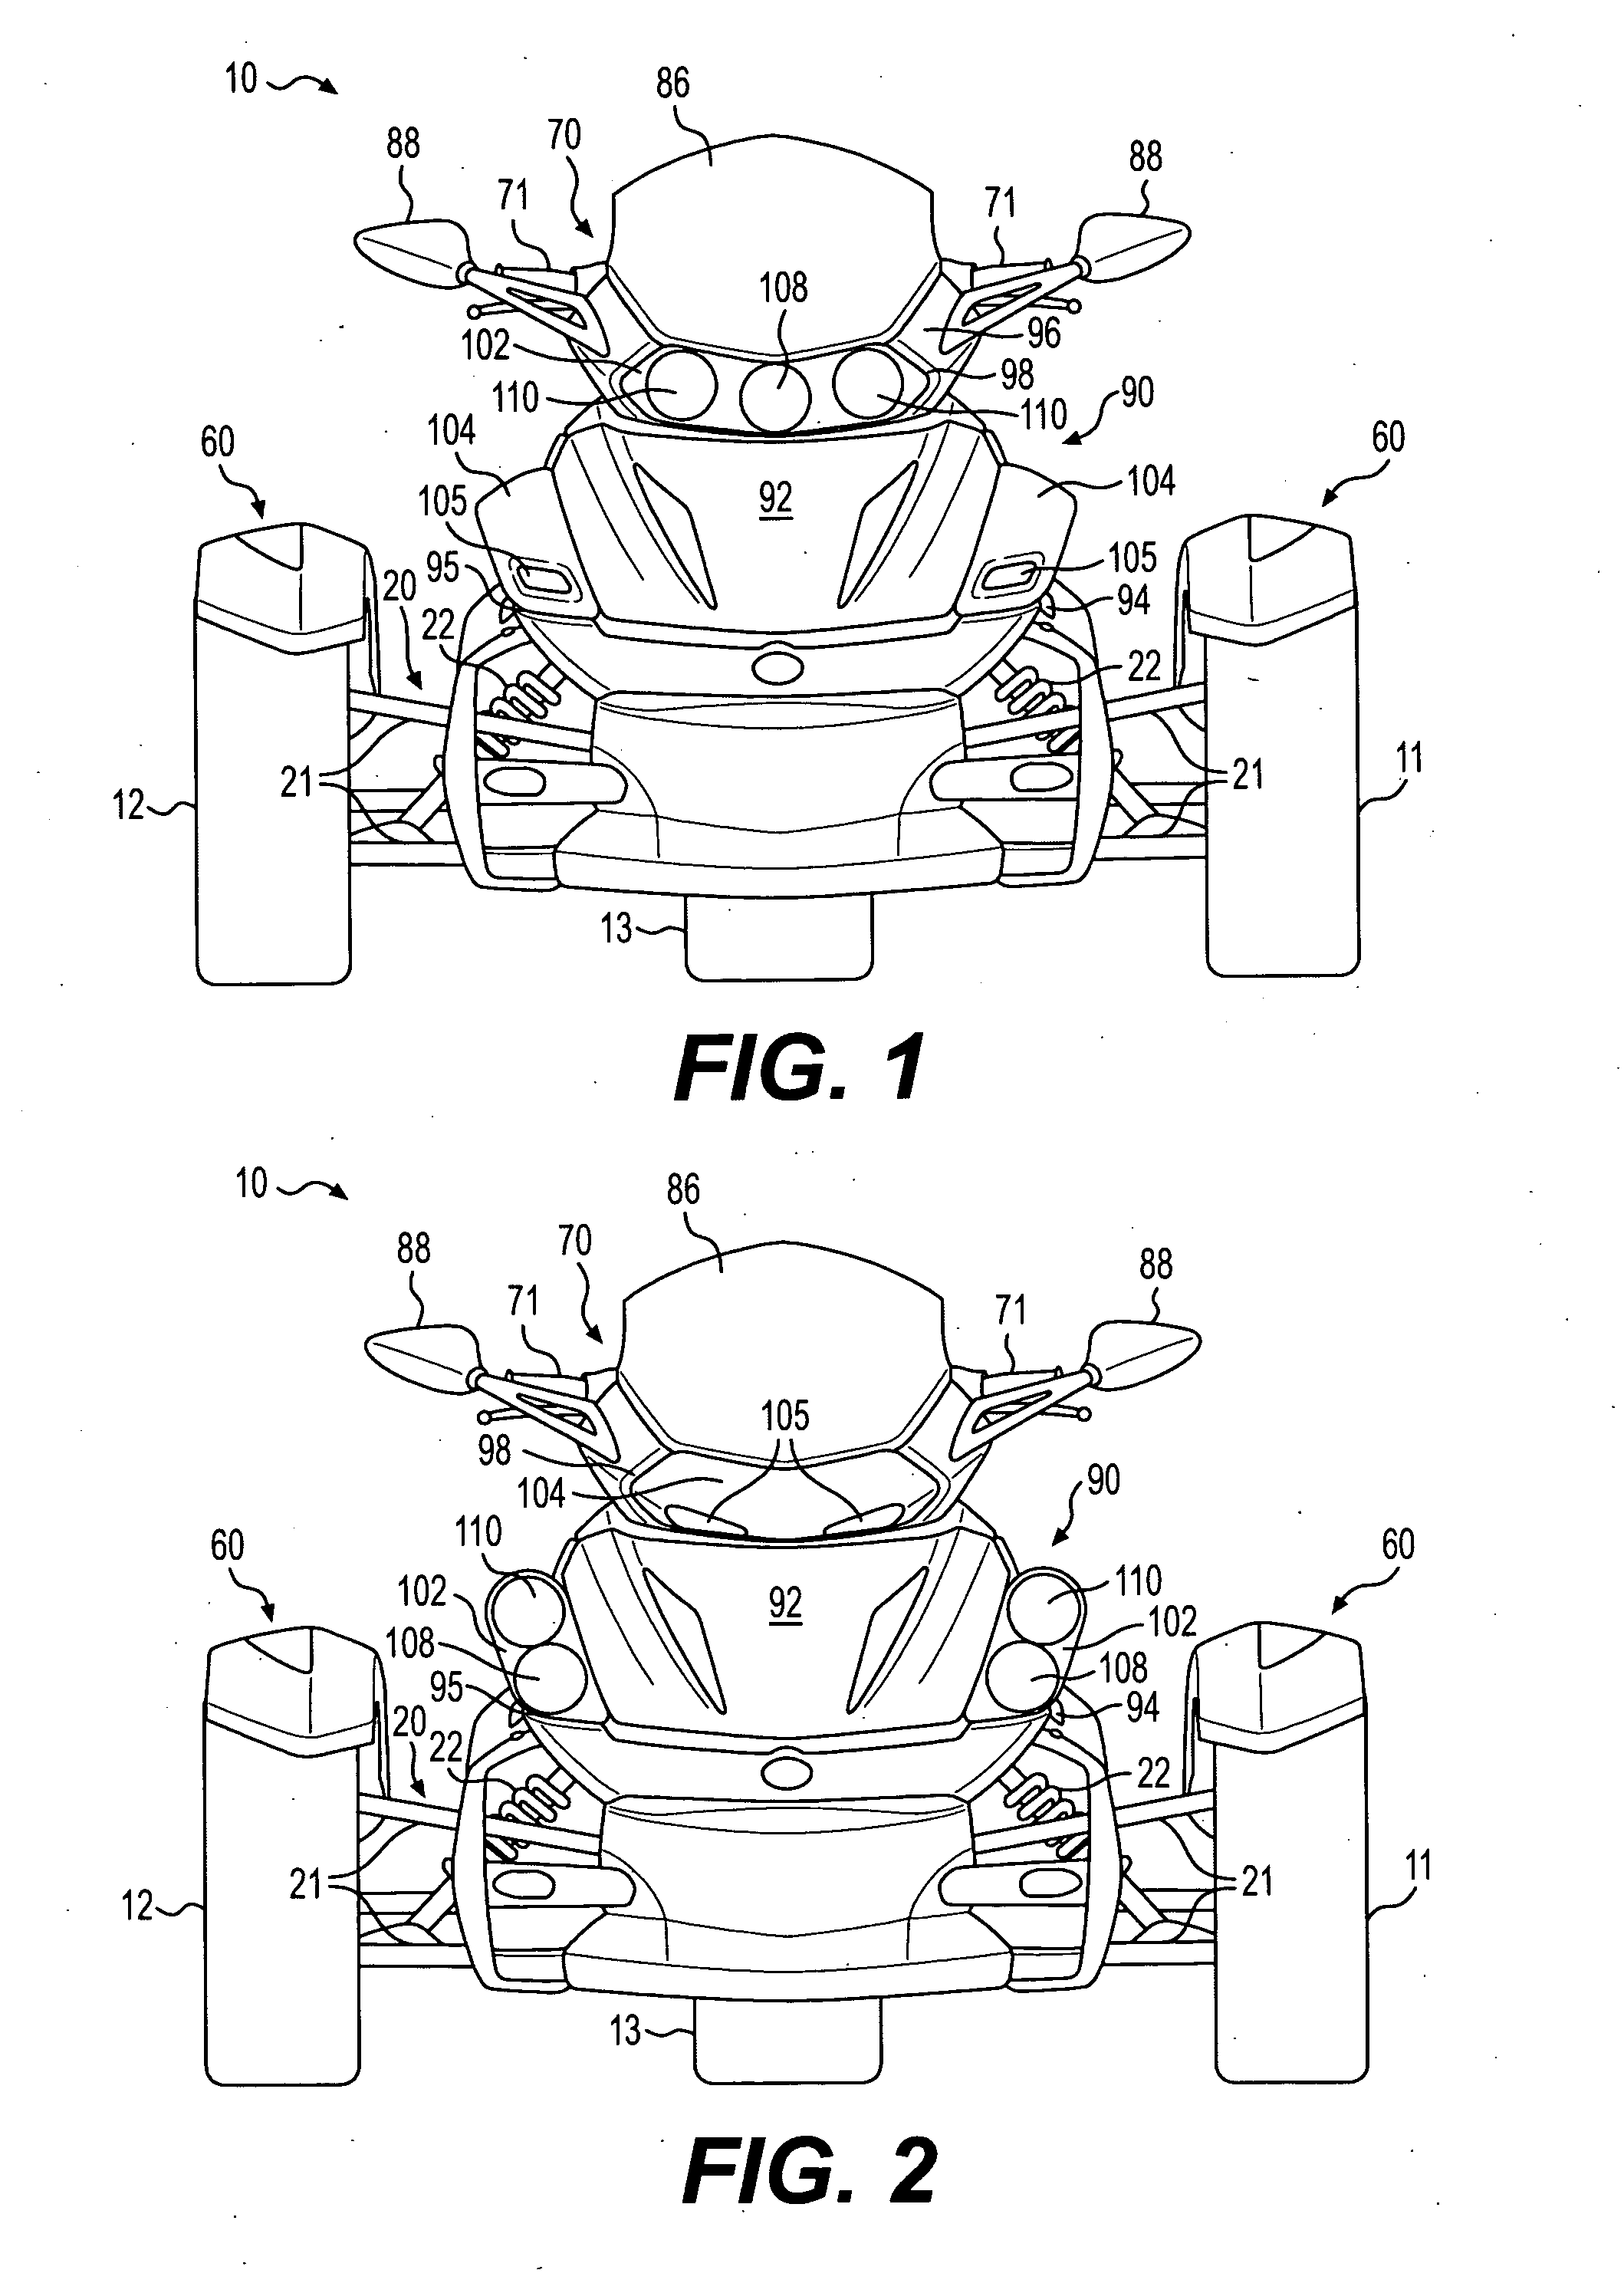 Modular front headlight for a three-wheeled vehicle